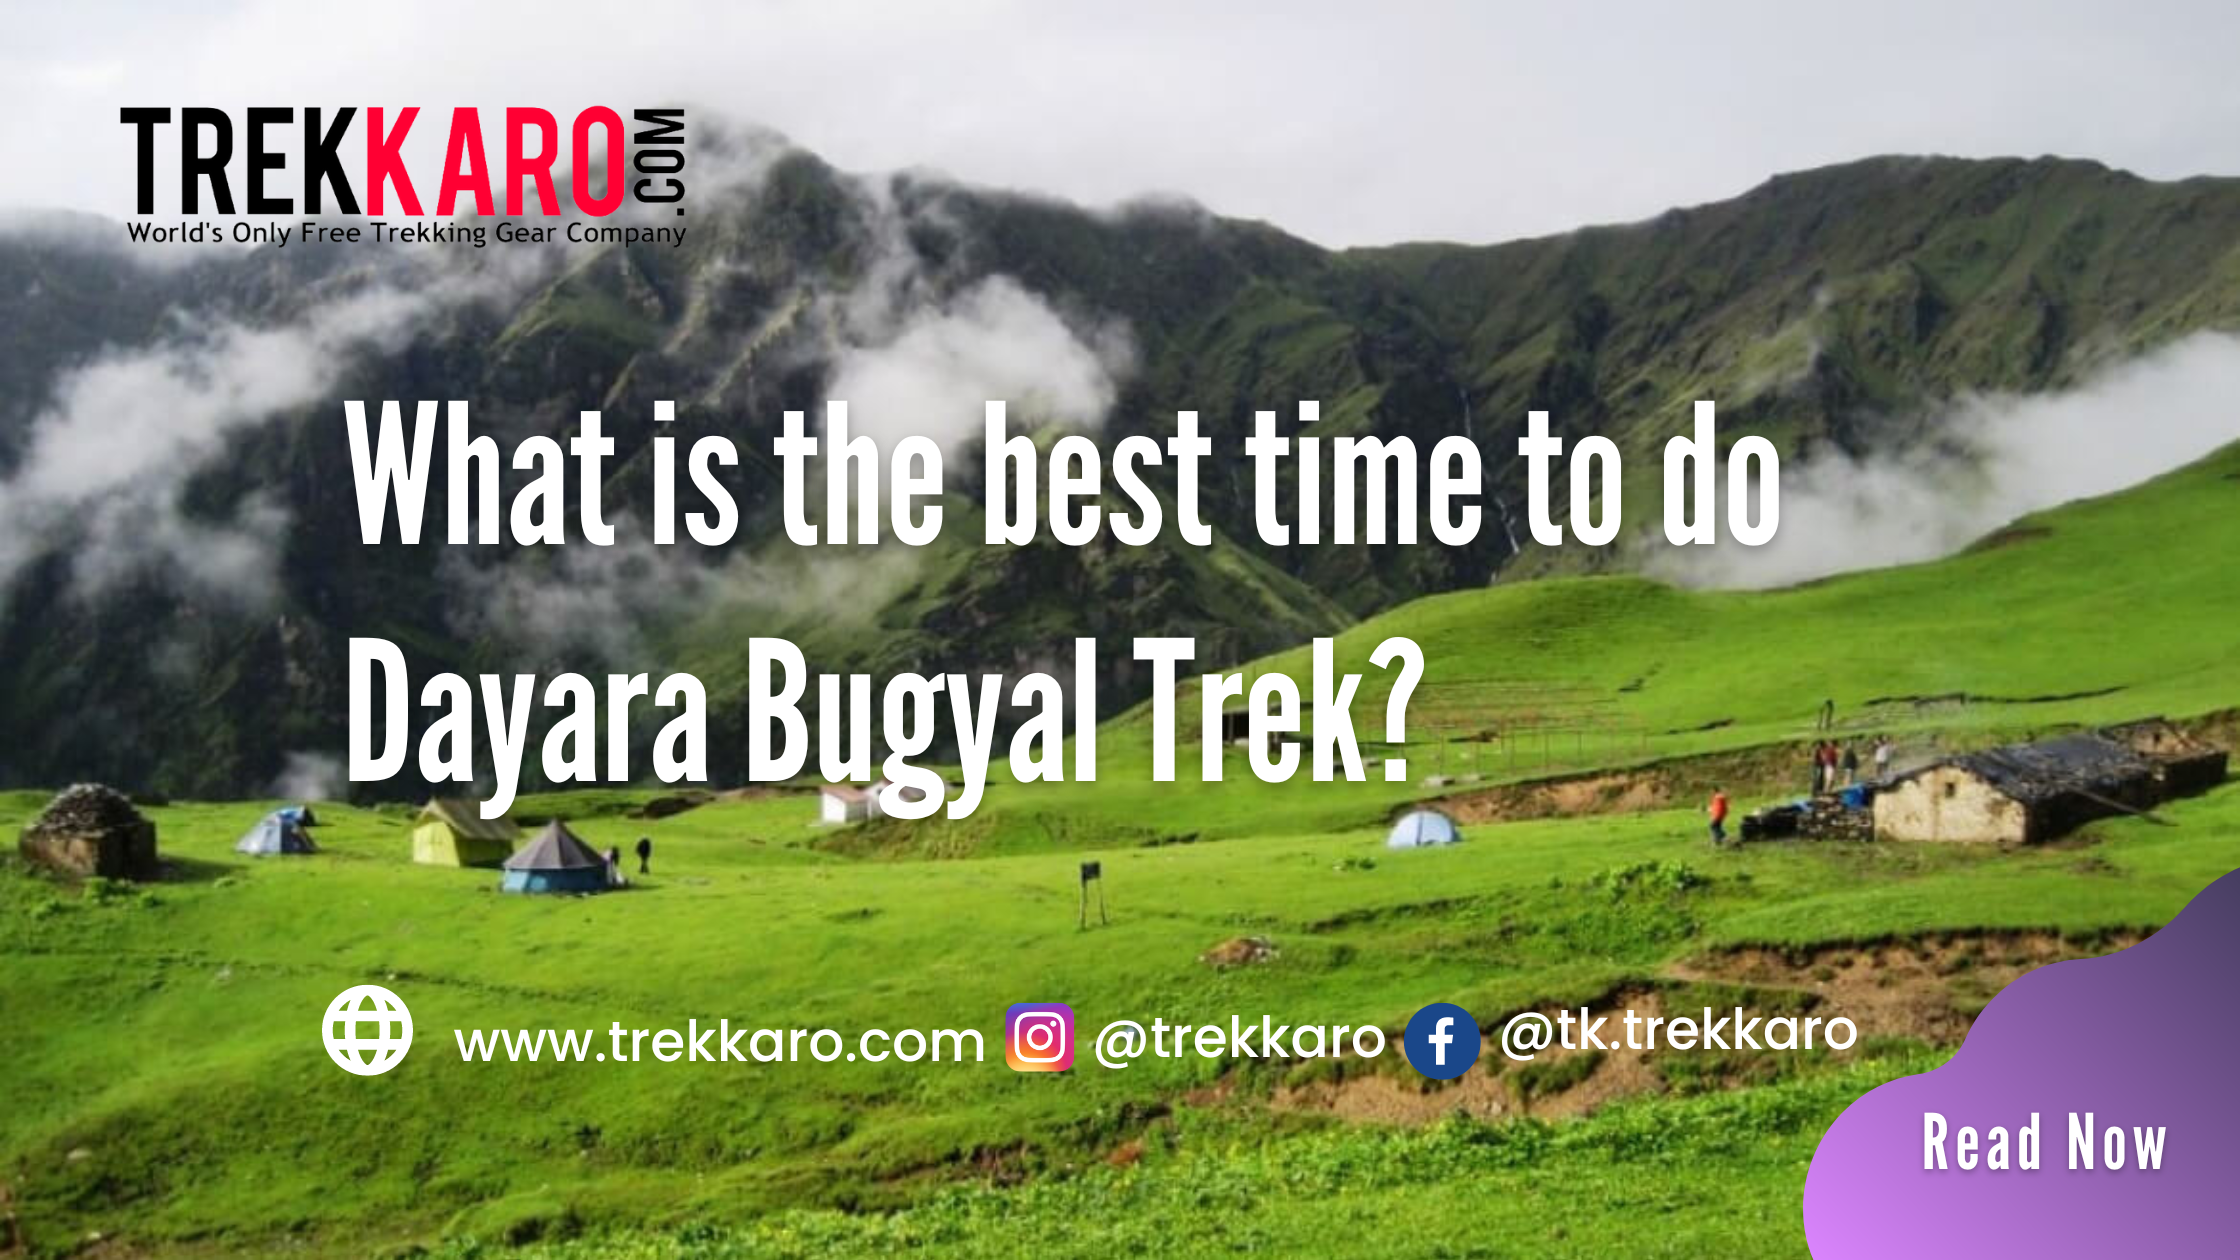 What is the best time to do Dayara Bugyal Trek